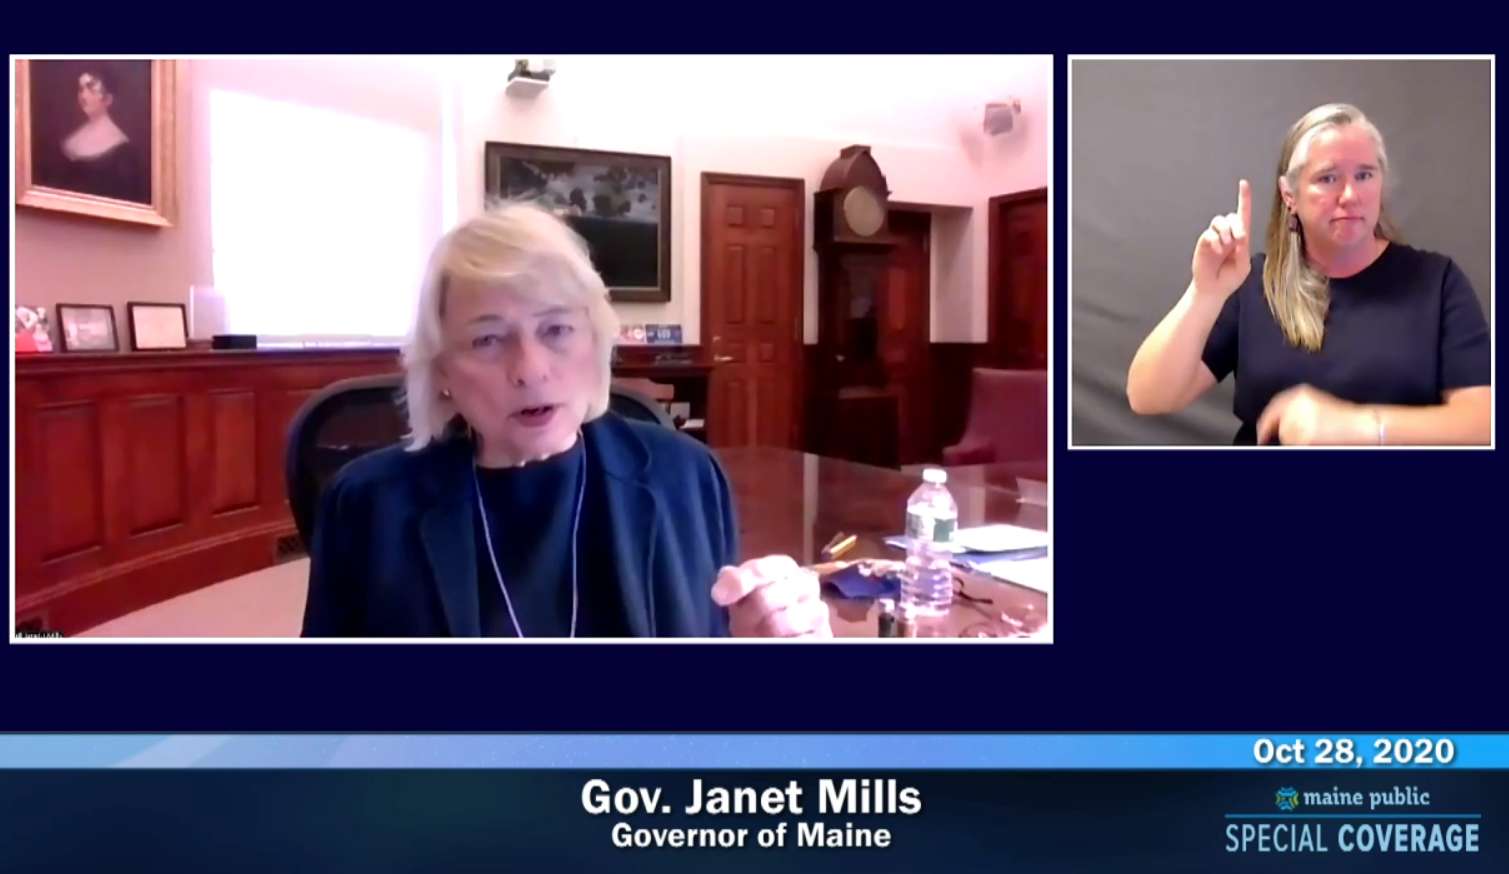 A screen image of a woman talking, with a sign language interpreter, under the woman it sasy gov janet mills governor of maine